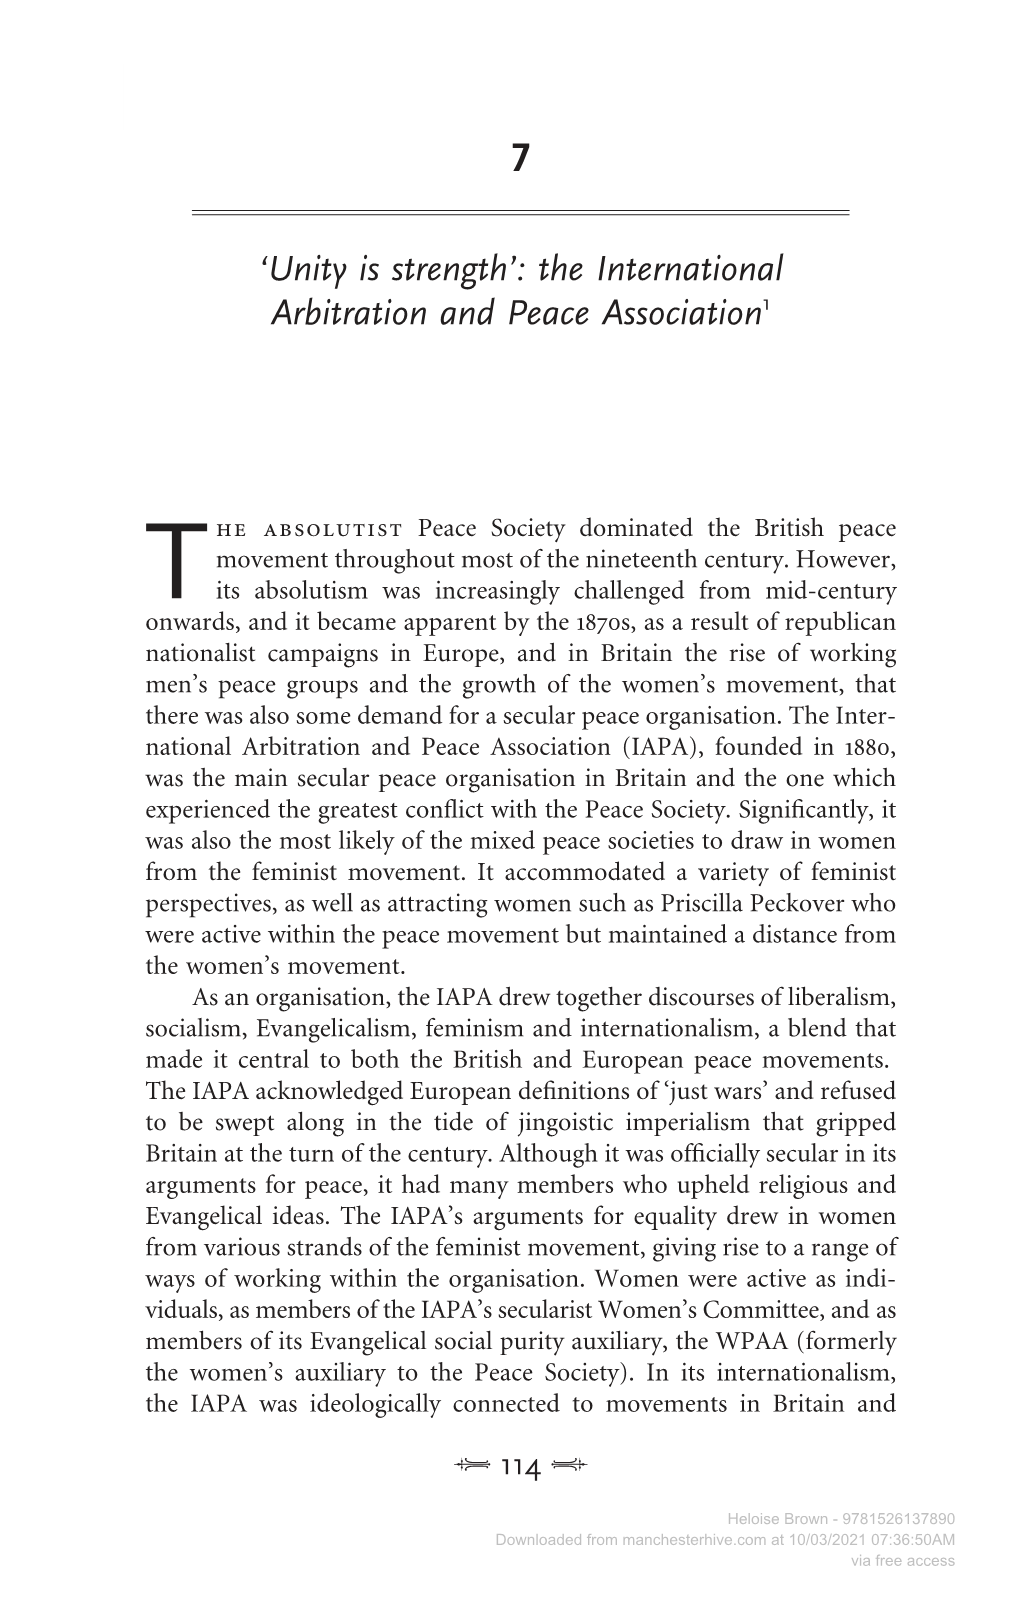 The International Arbitration and Peace Association1